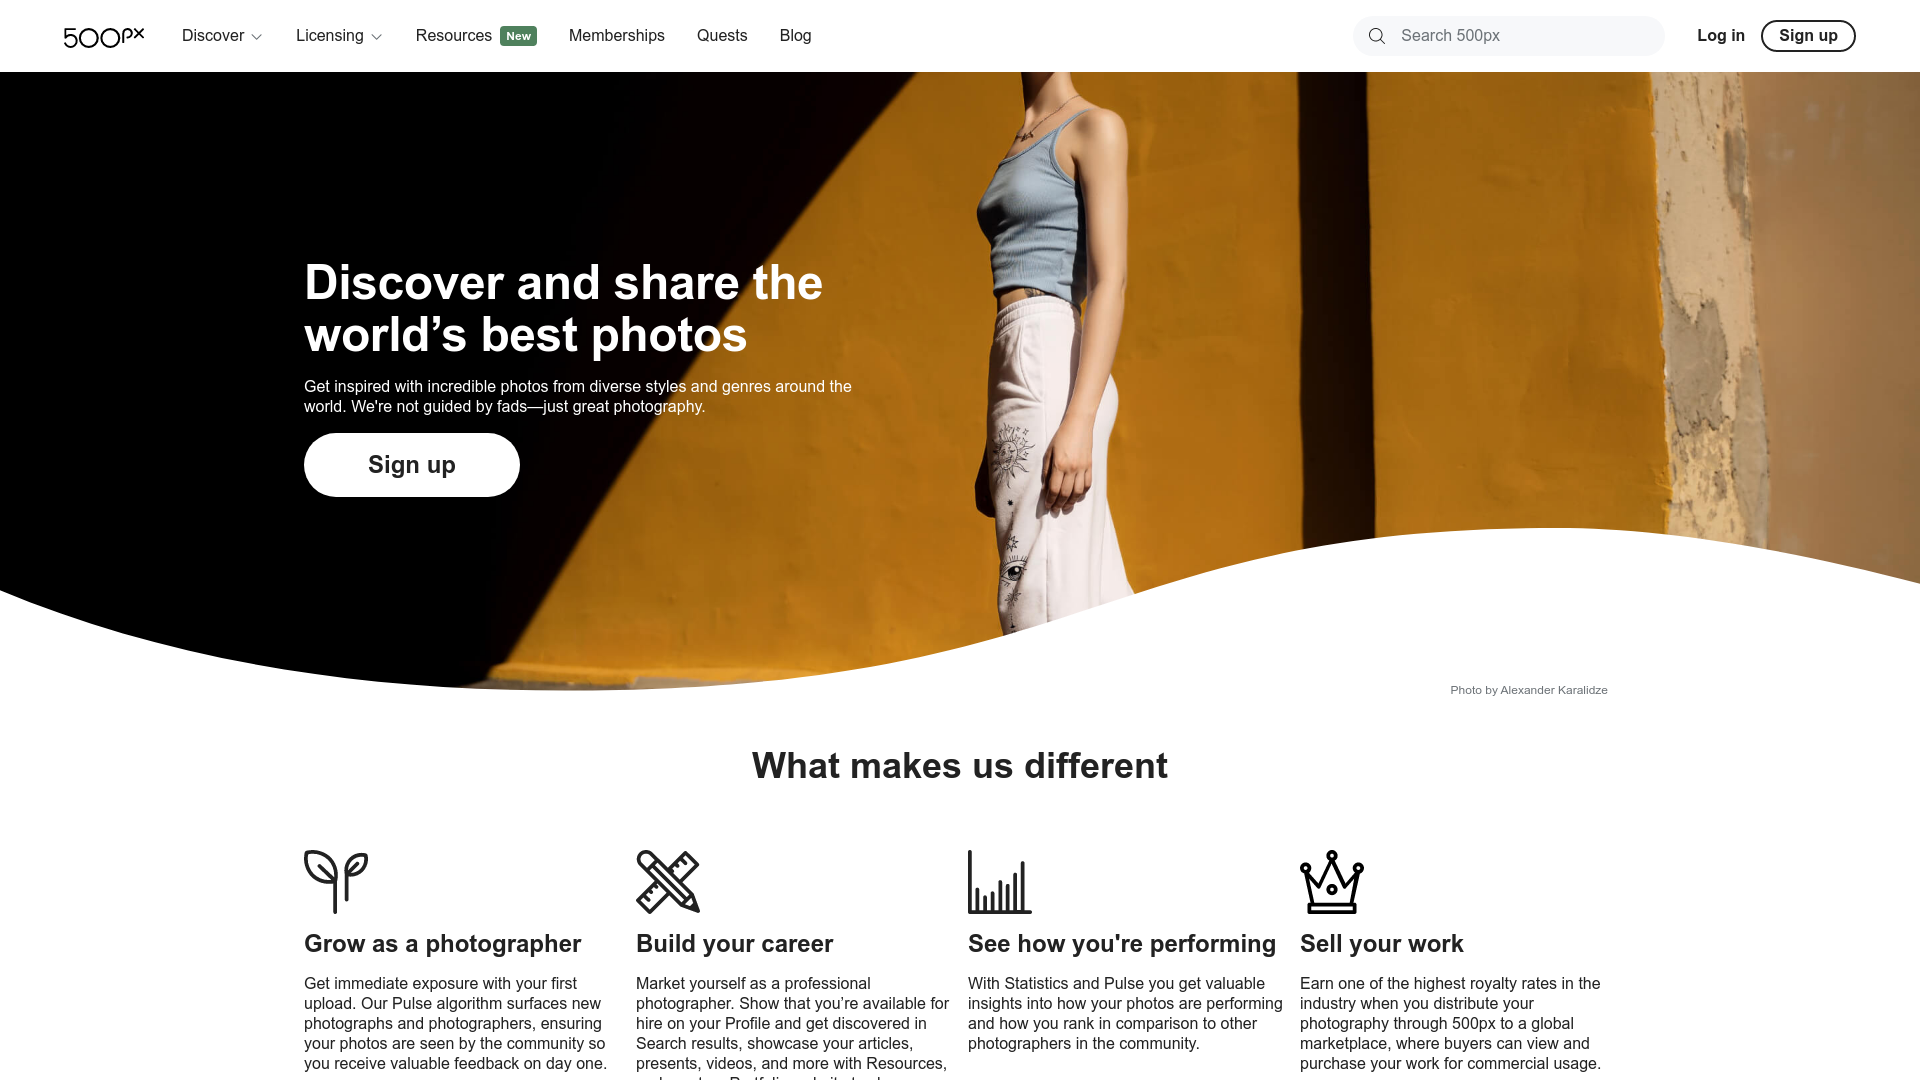 500px is a global online photo-sharing platform that is a subsidiary of Visual China Group.